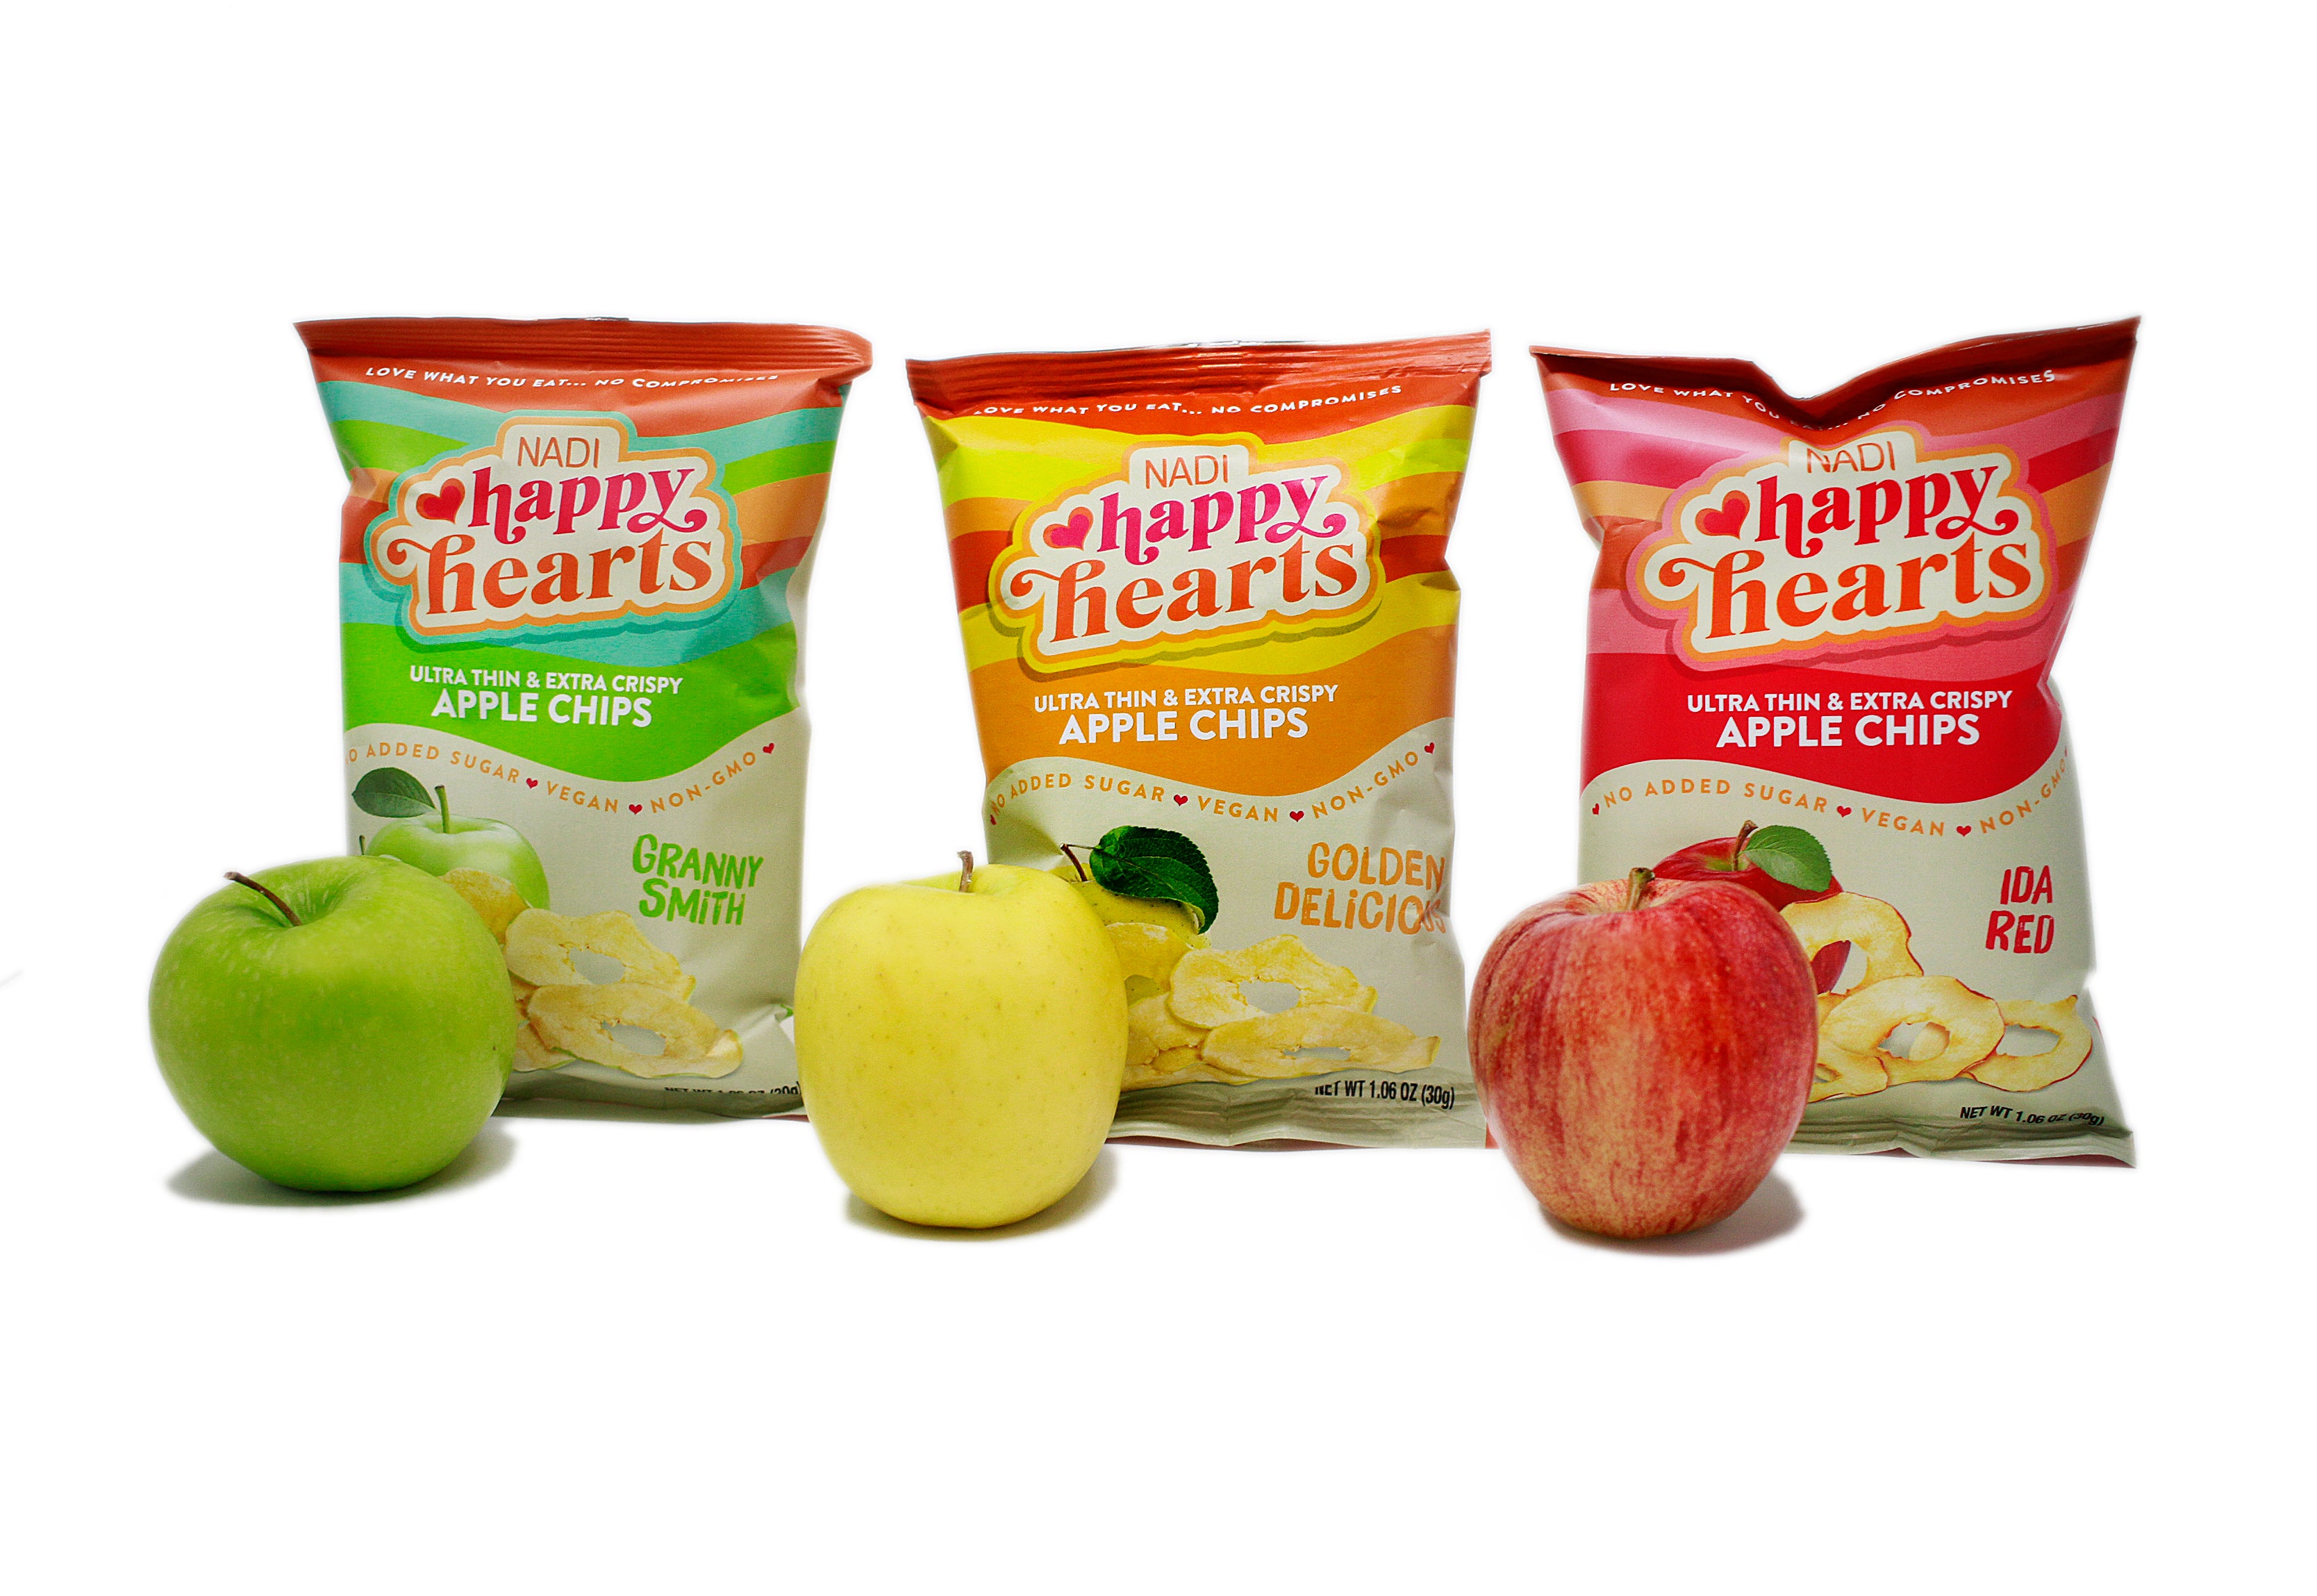 3 bags of Happy Hearts No added sugar Apple Chips, Golden Delicious, Ida Red and Granny Smith